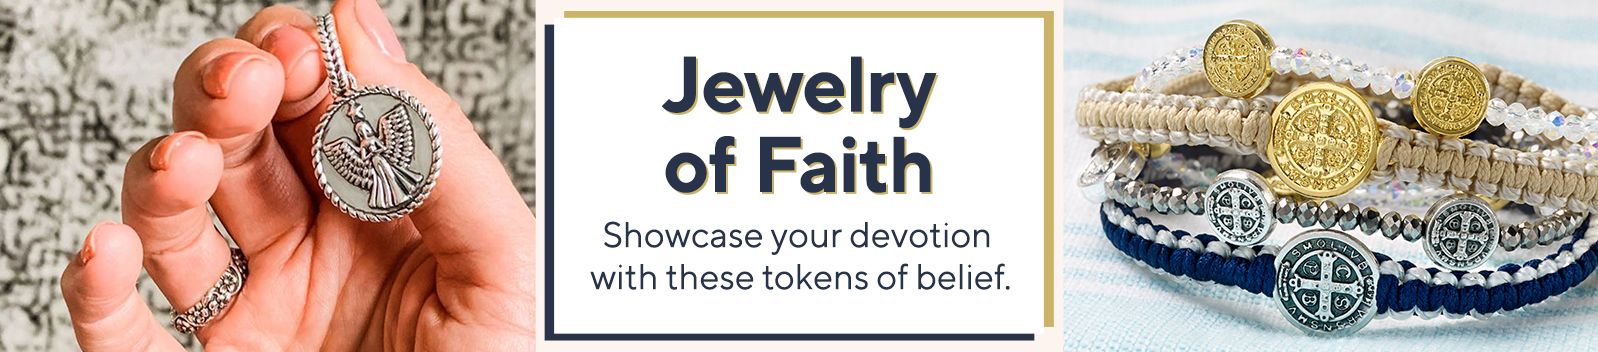 Jewelry of Faith.  Showcase your devotion with these tokens of belief.